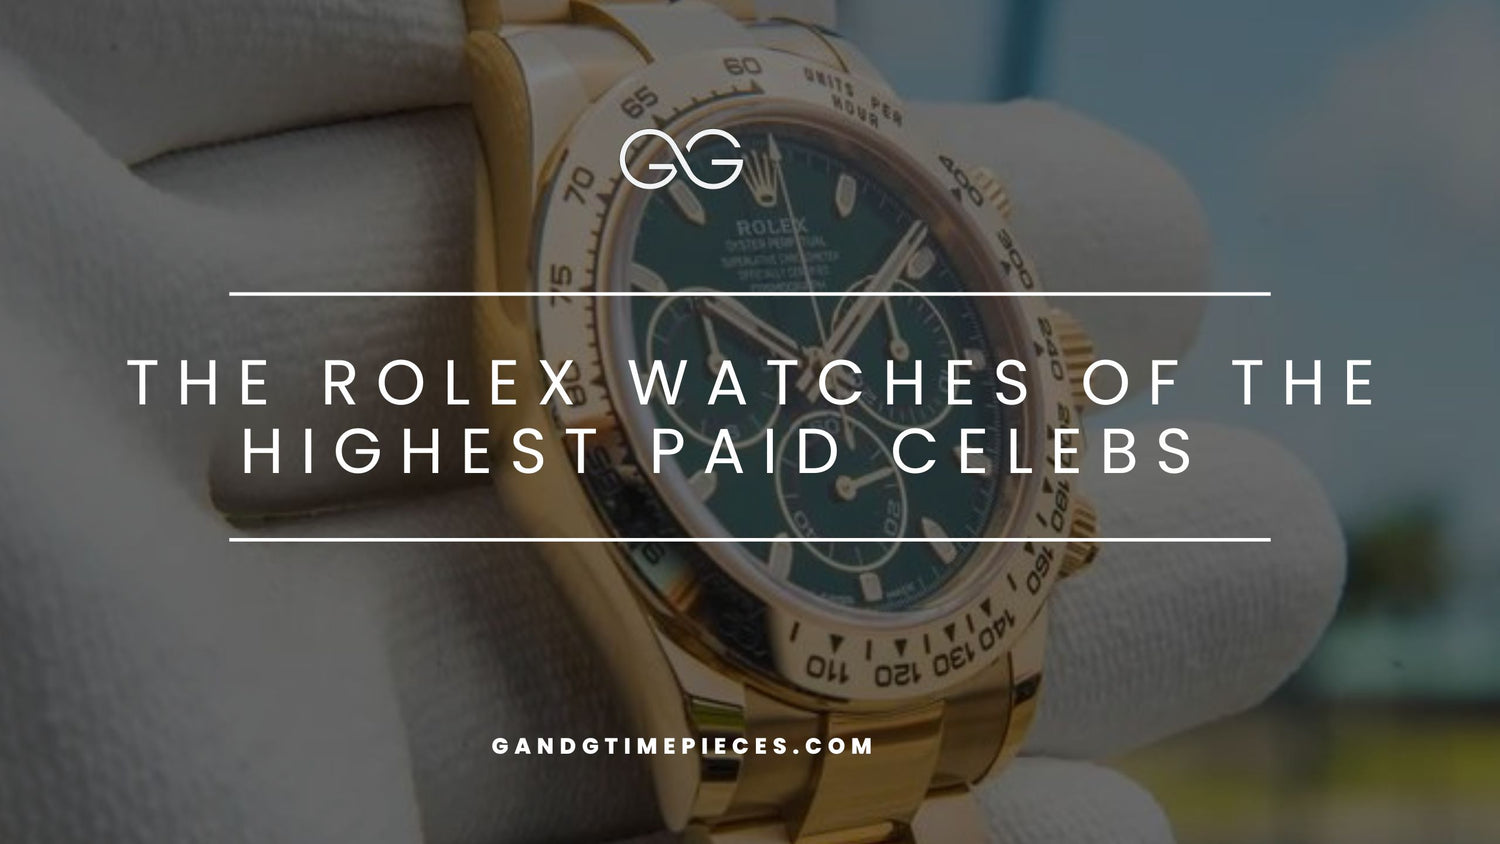 The Rolex Watches of the Highest Paid Celebs